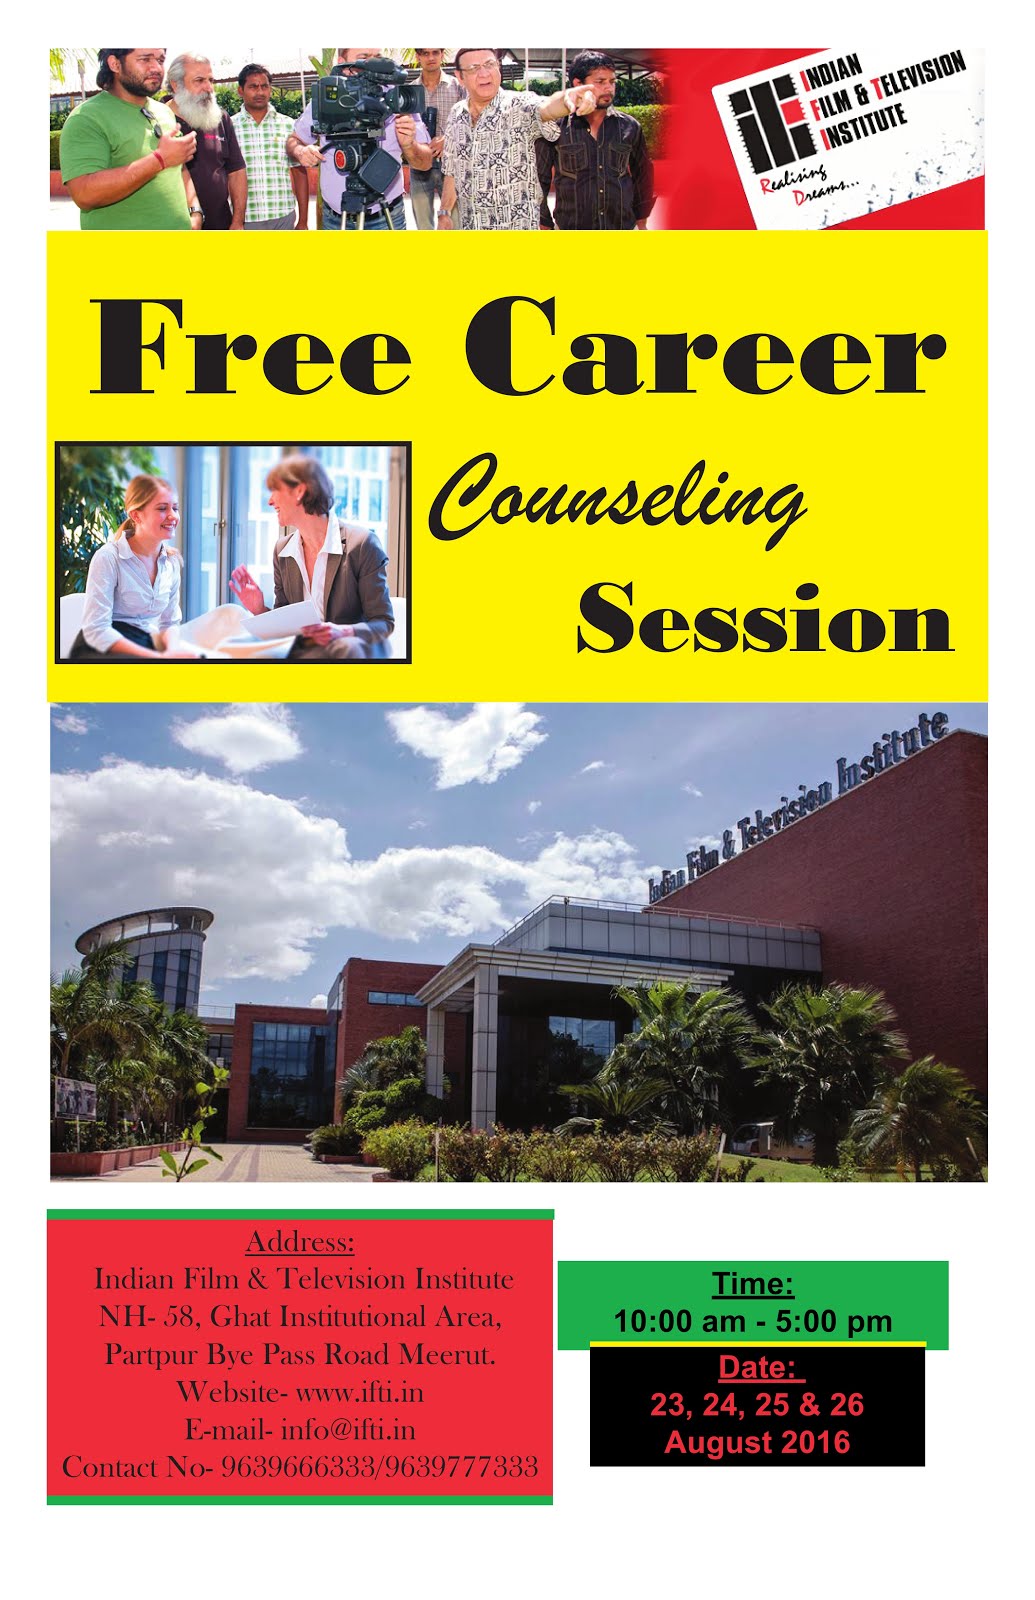 Free Career Counseling Session